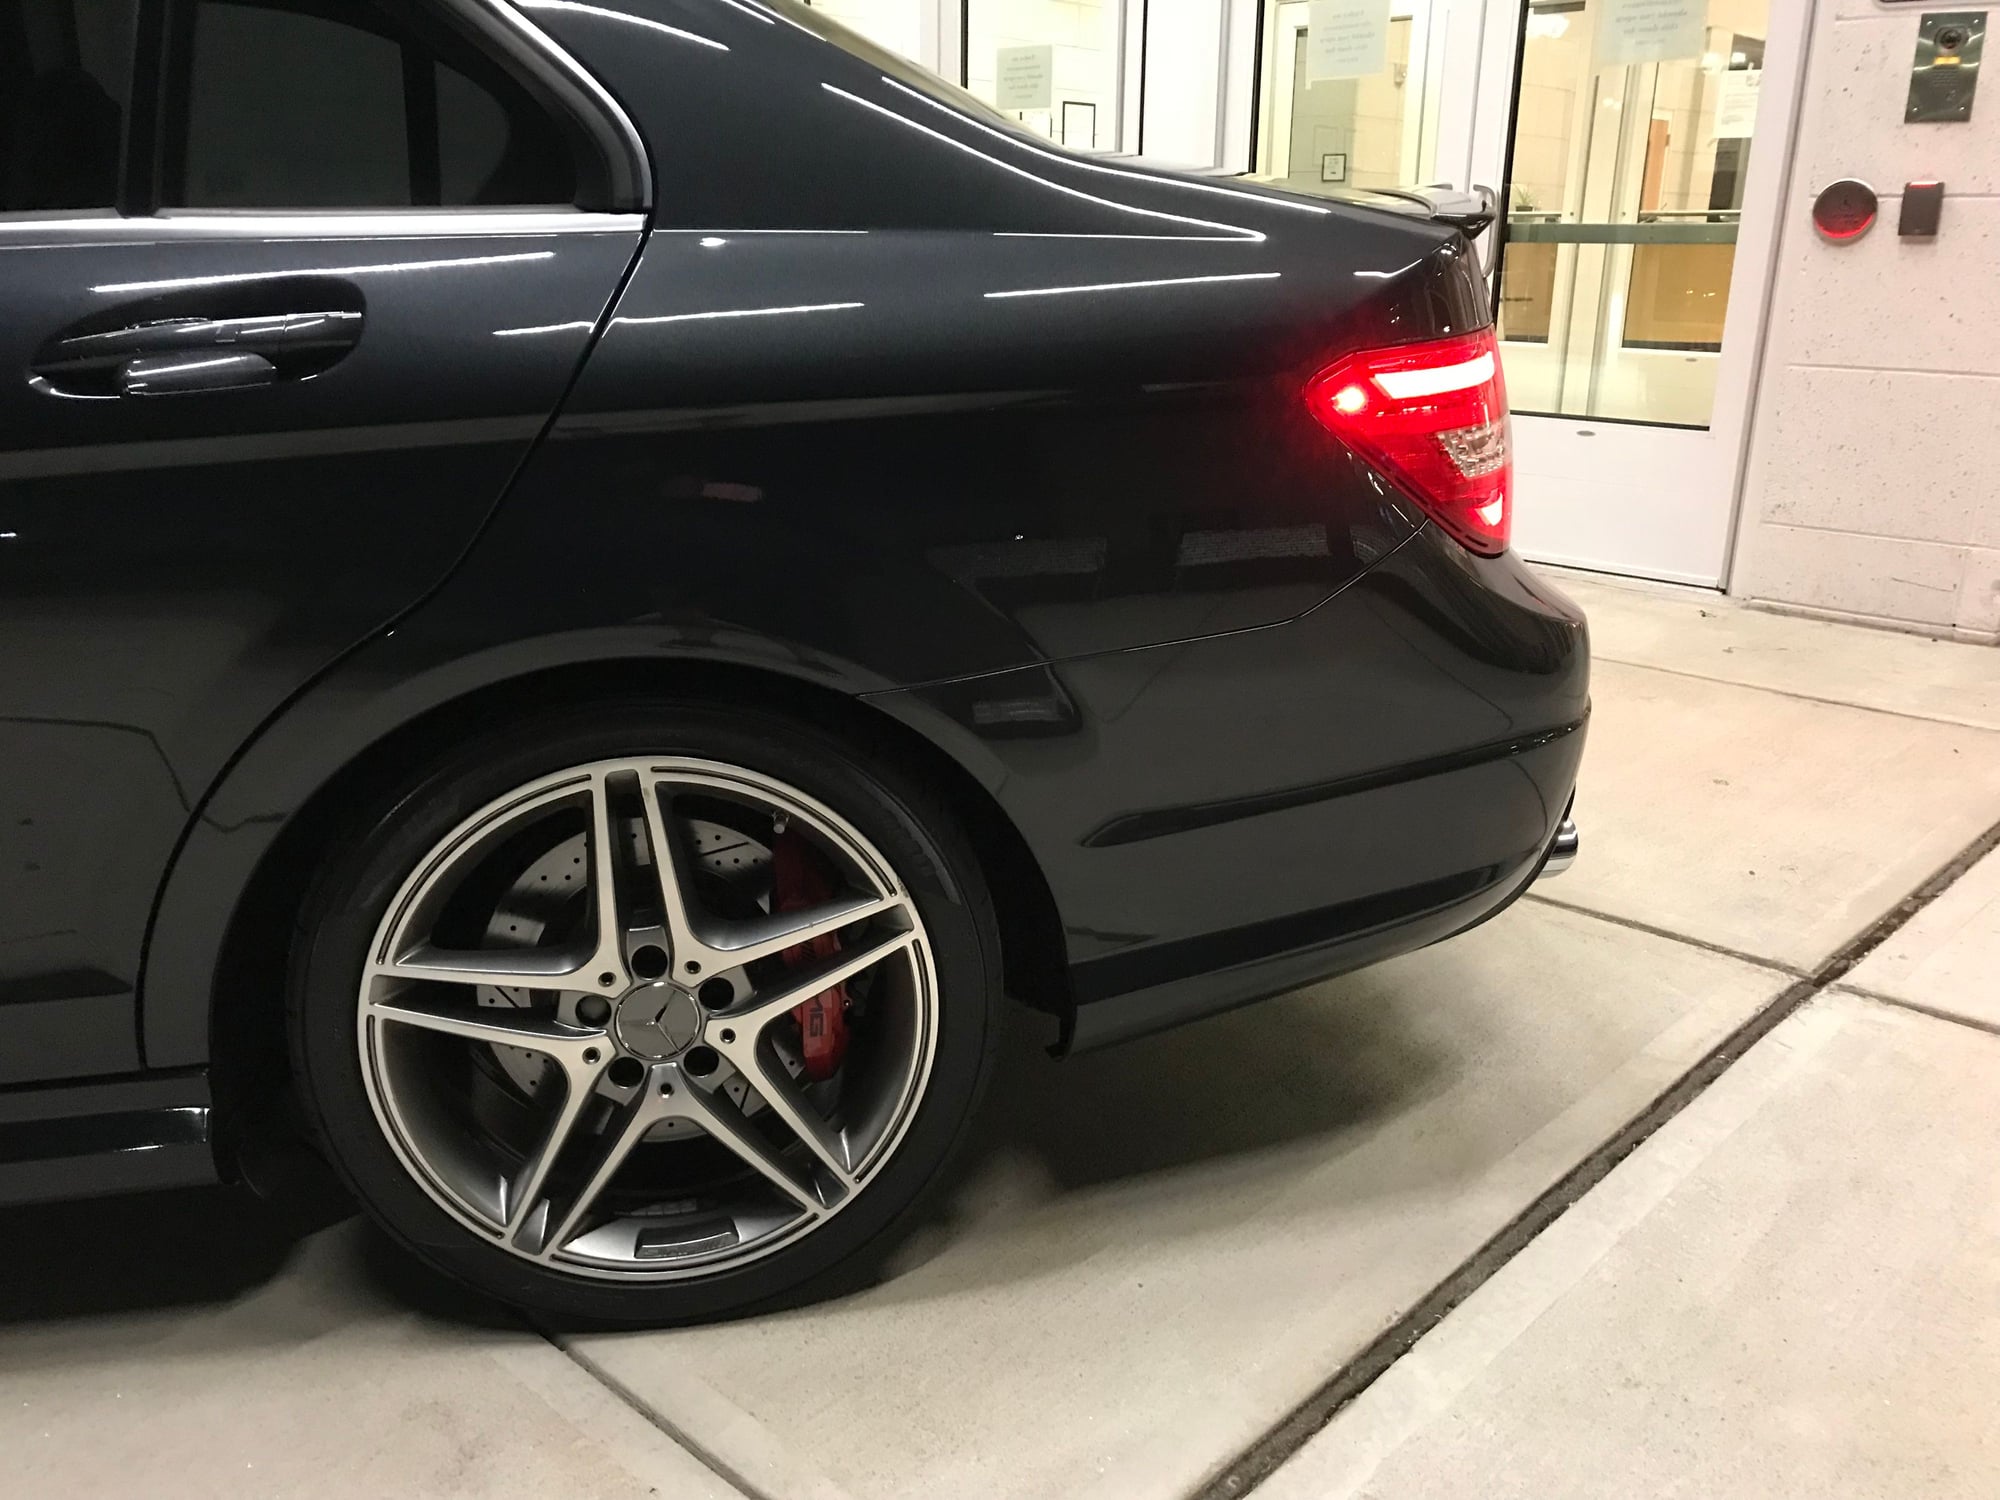 2012 Mercedes-Benz C63 AMG - 2012 Mercedes-Benz C63 AMG P31 Package with LSD. 42,900 mi - Used - VIN WDDGF7HB9CA581790 - 42,900 Miles - 8 cyl - 2WD - Automatic - Sedan - Black - New Britain, CT 06053, United States